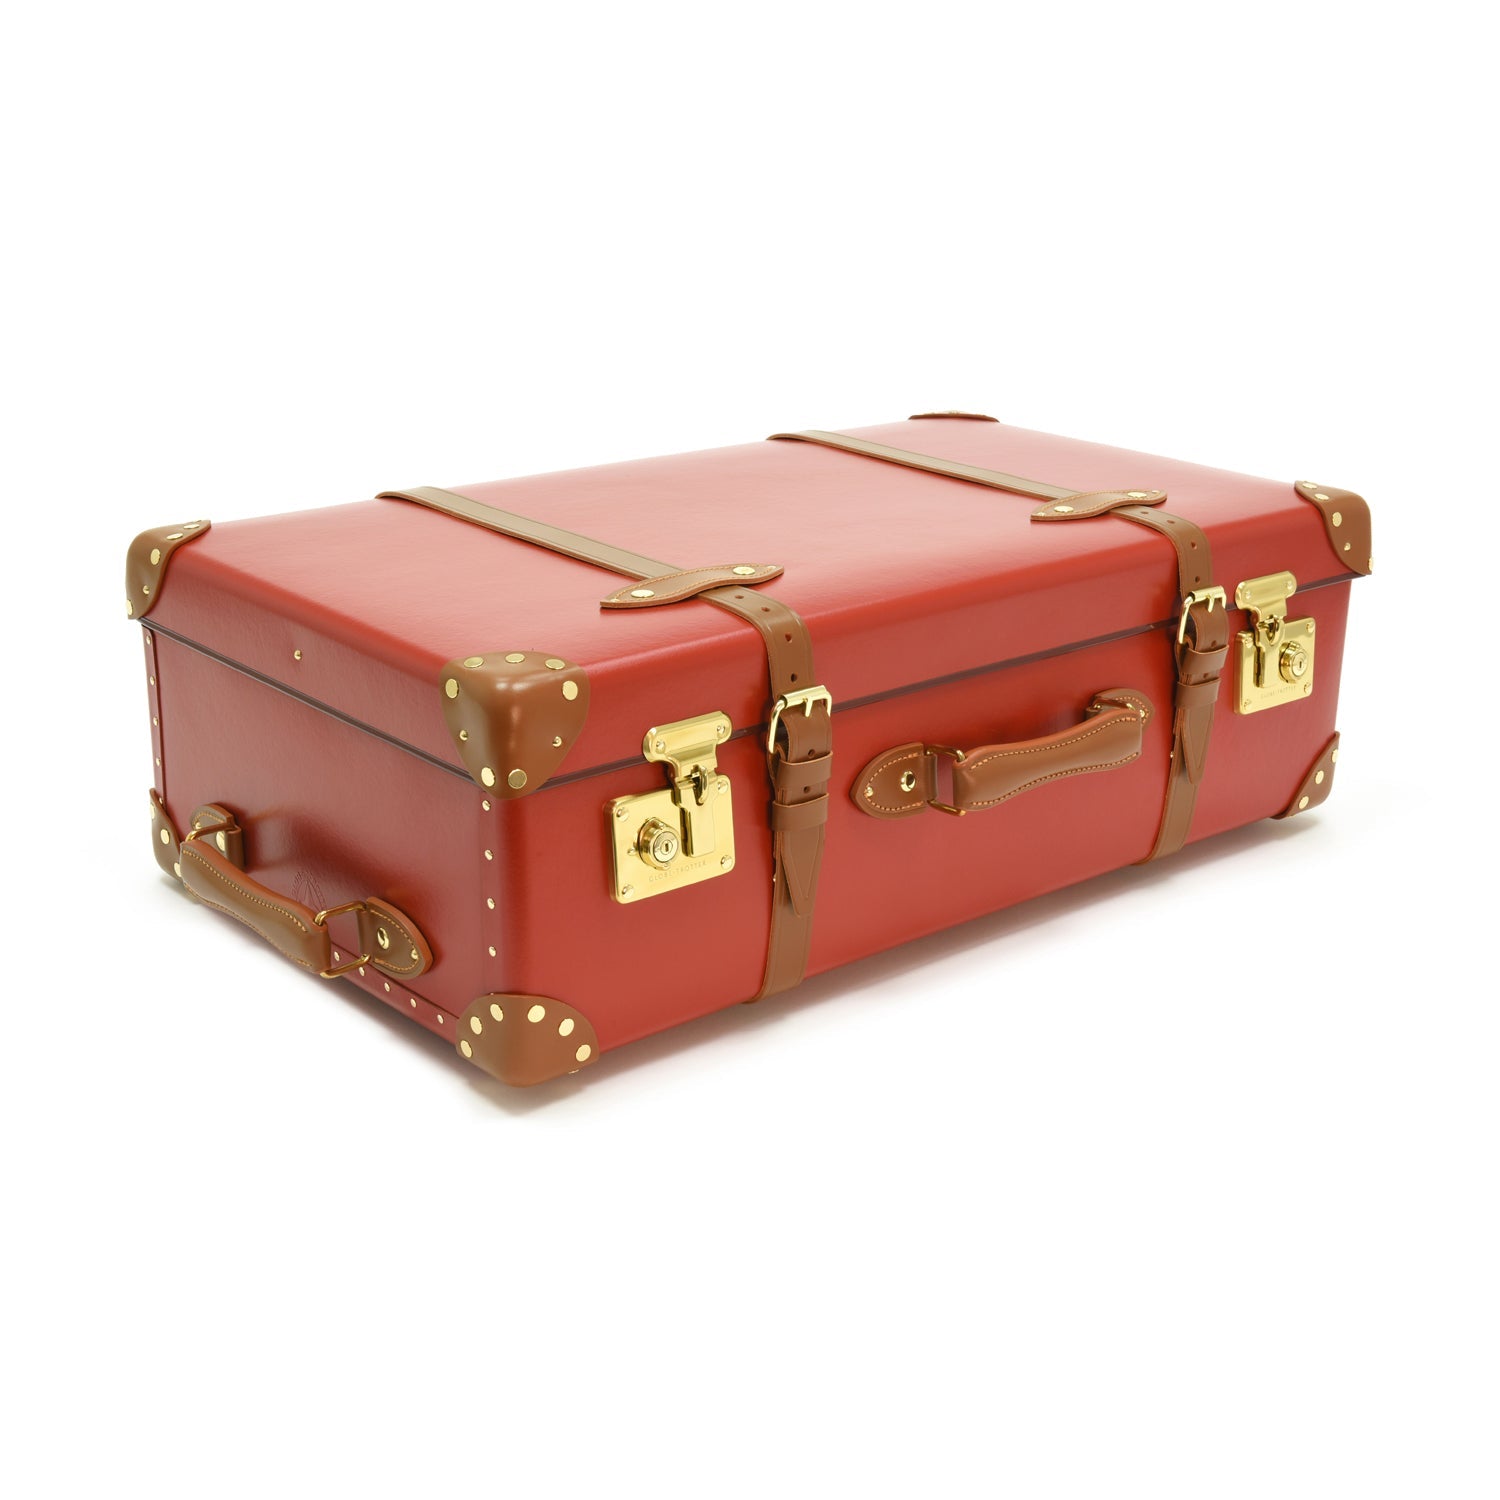 Centenary · Large Suitcase | Red/Caramel - GLOBE-TROTTER